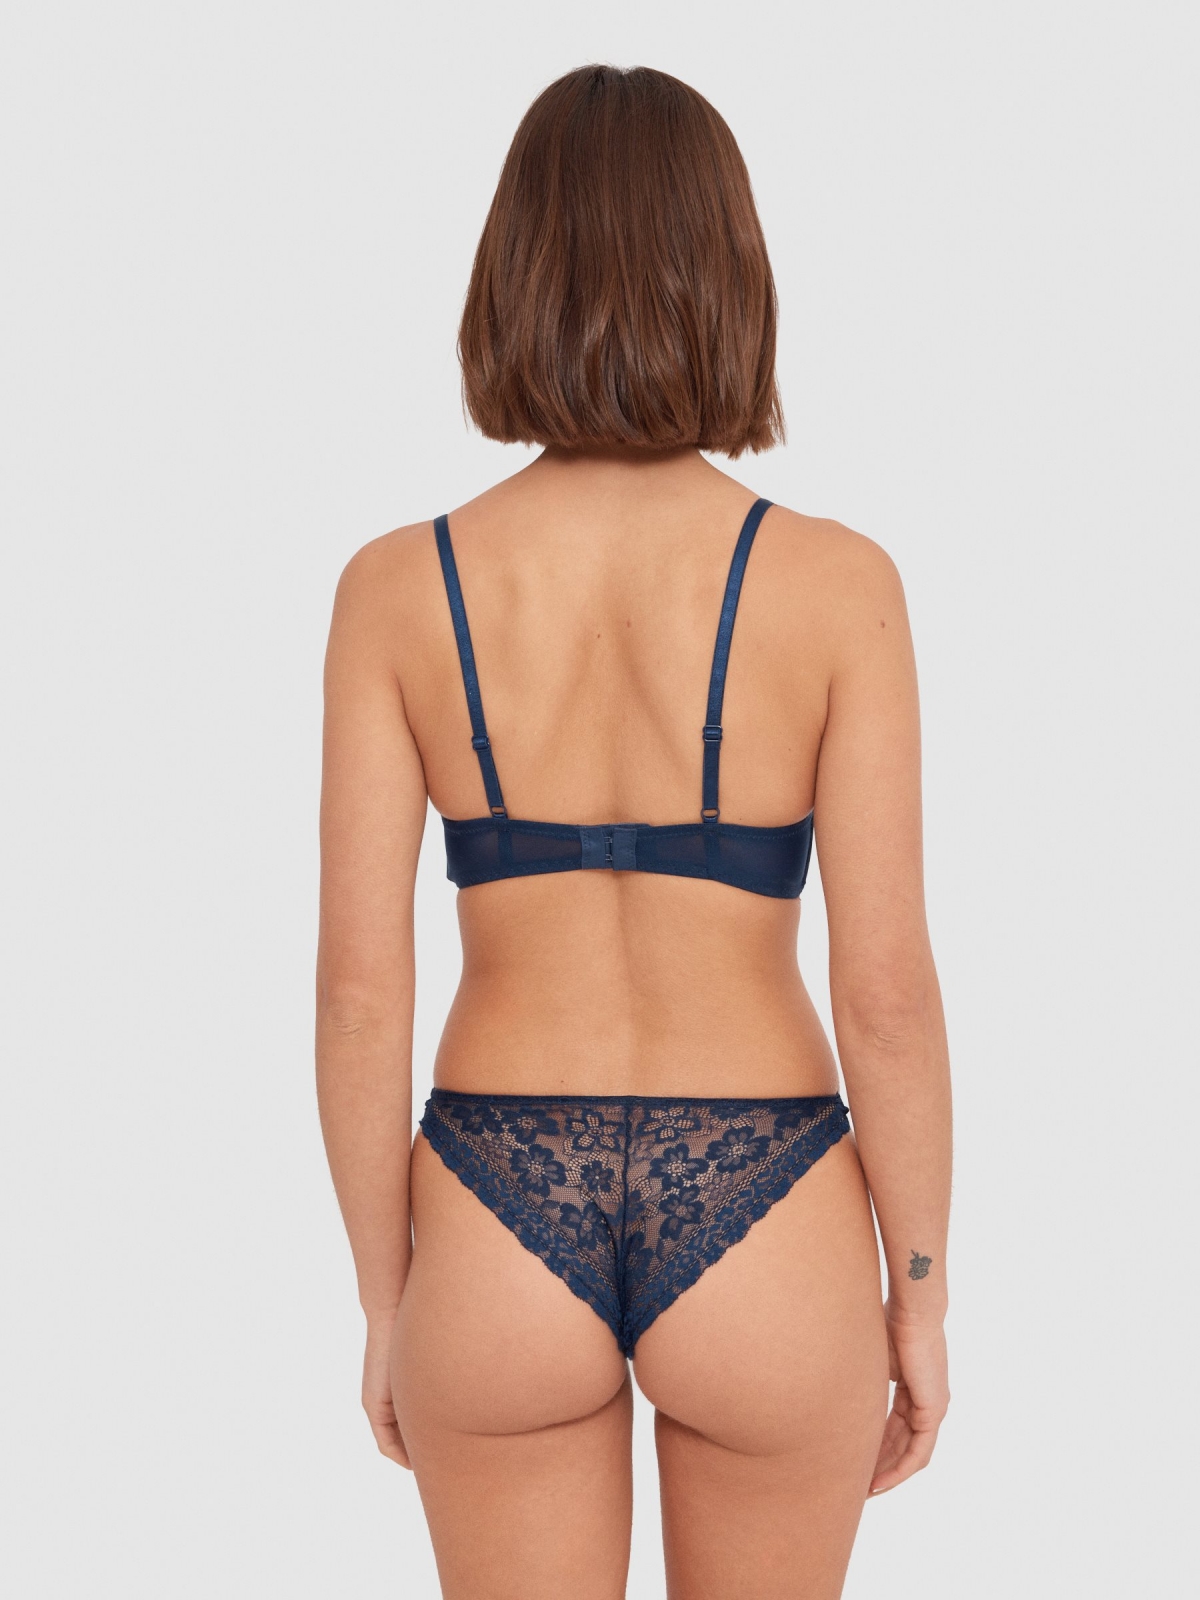 Blue lace bra navy middle back view